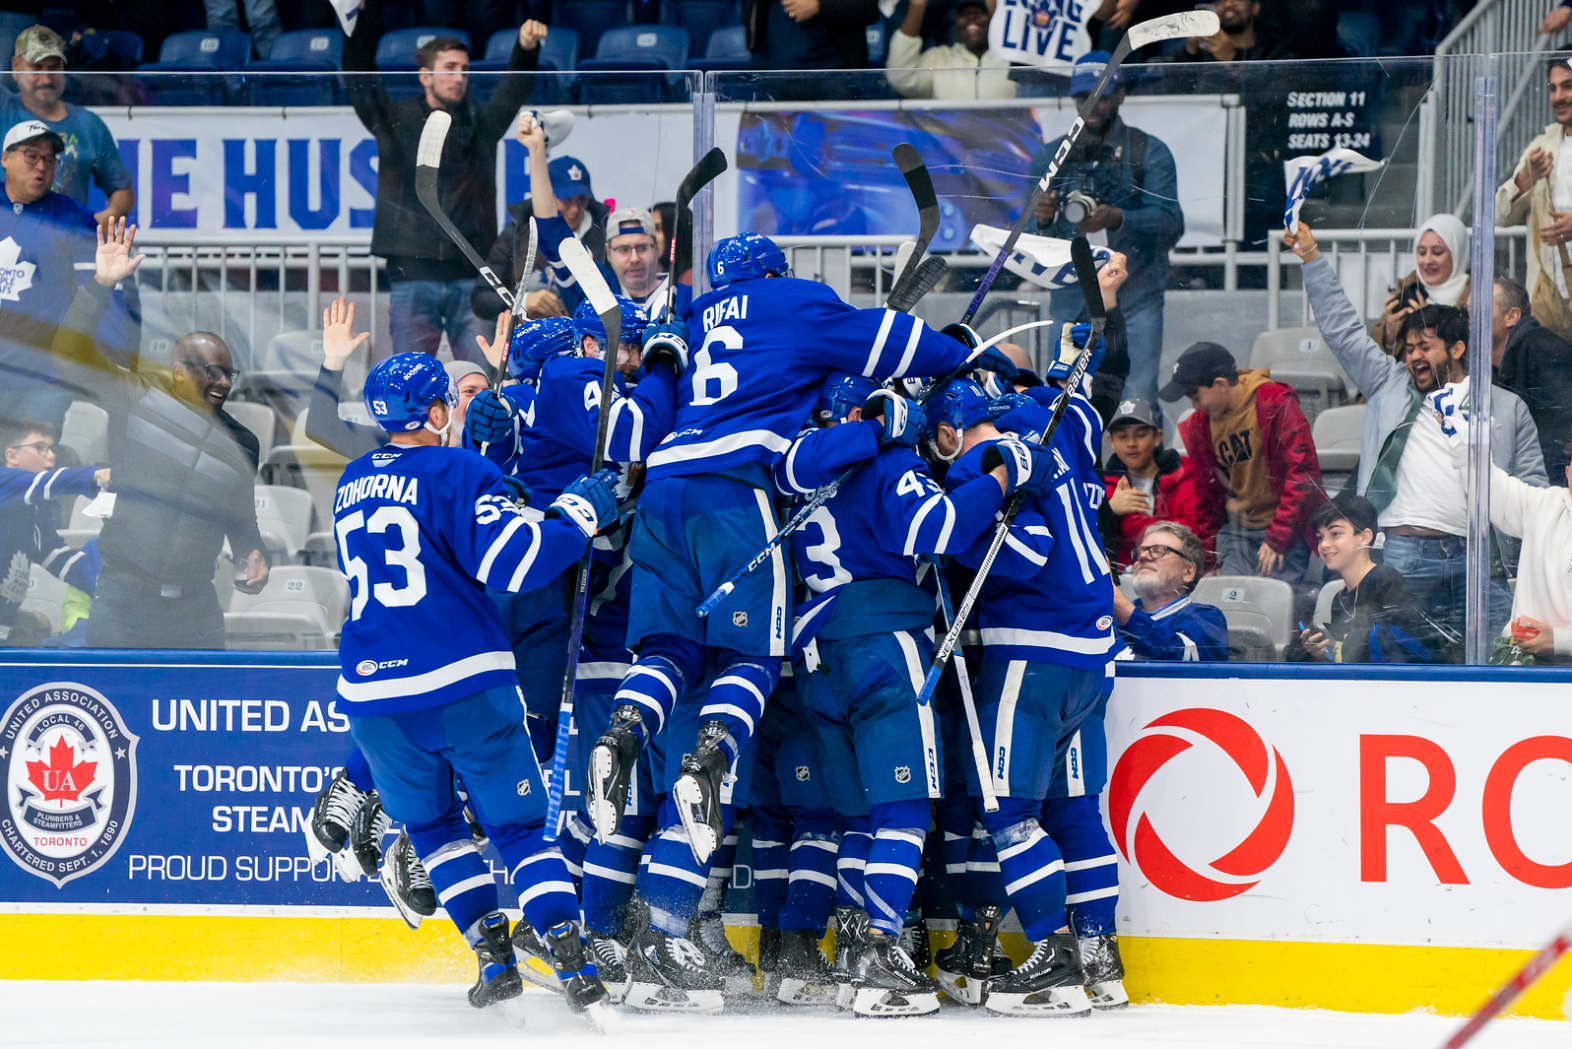 Toronto Marlies – The Official Site of the Toronto Marlies